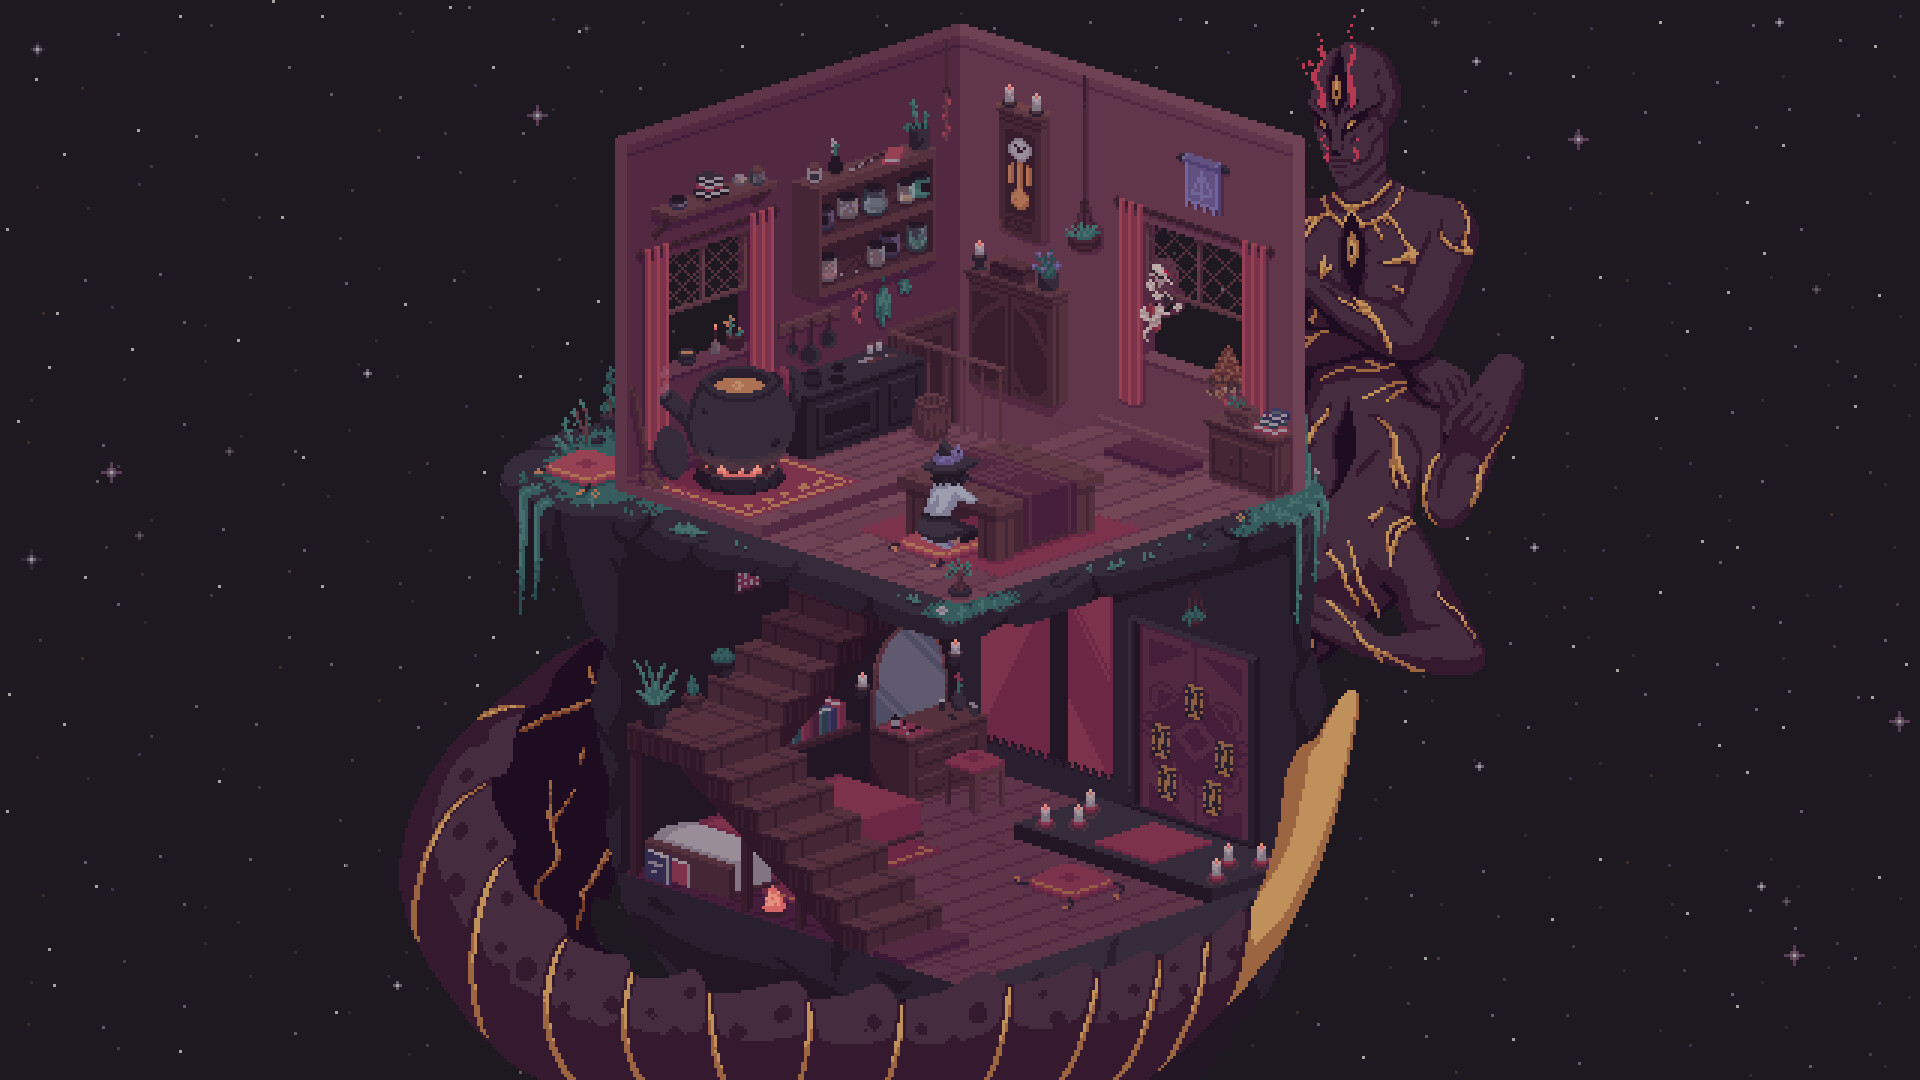 A pixelized apartment, colored in purple and pinks.